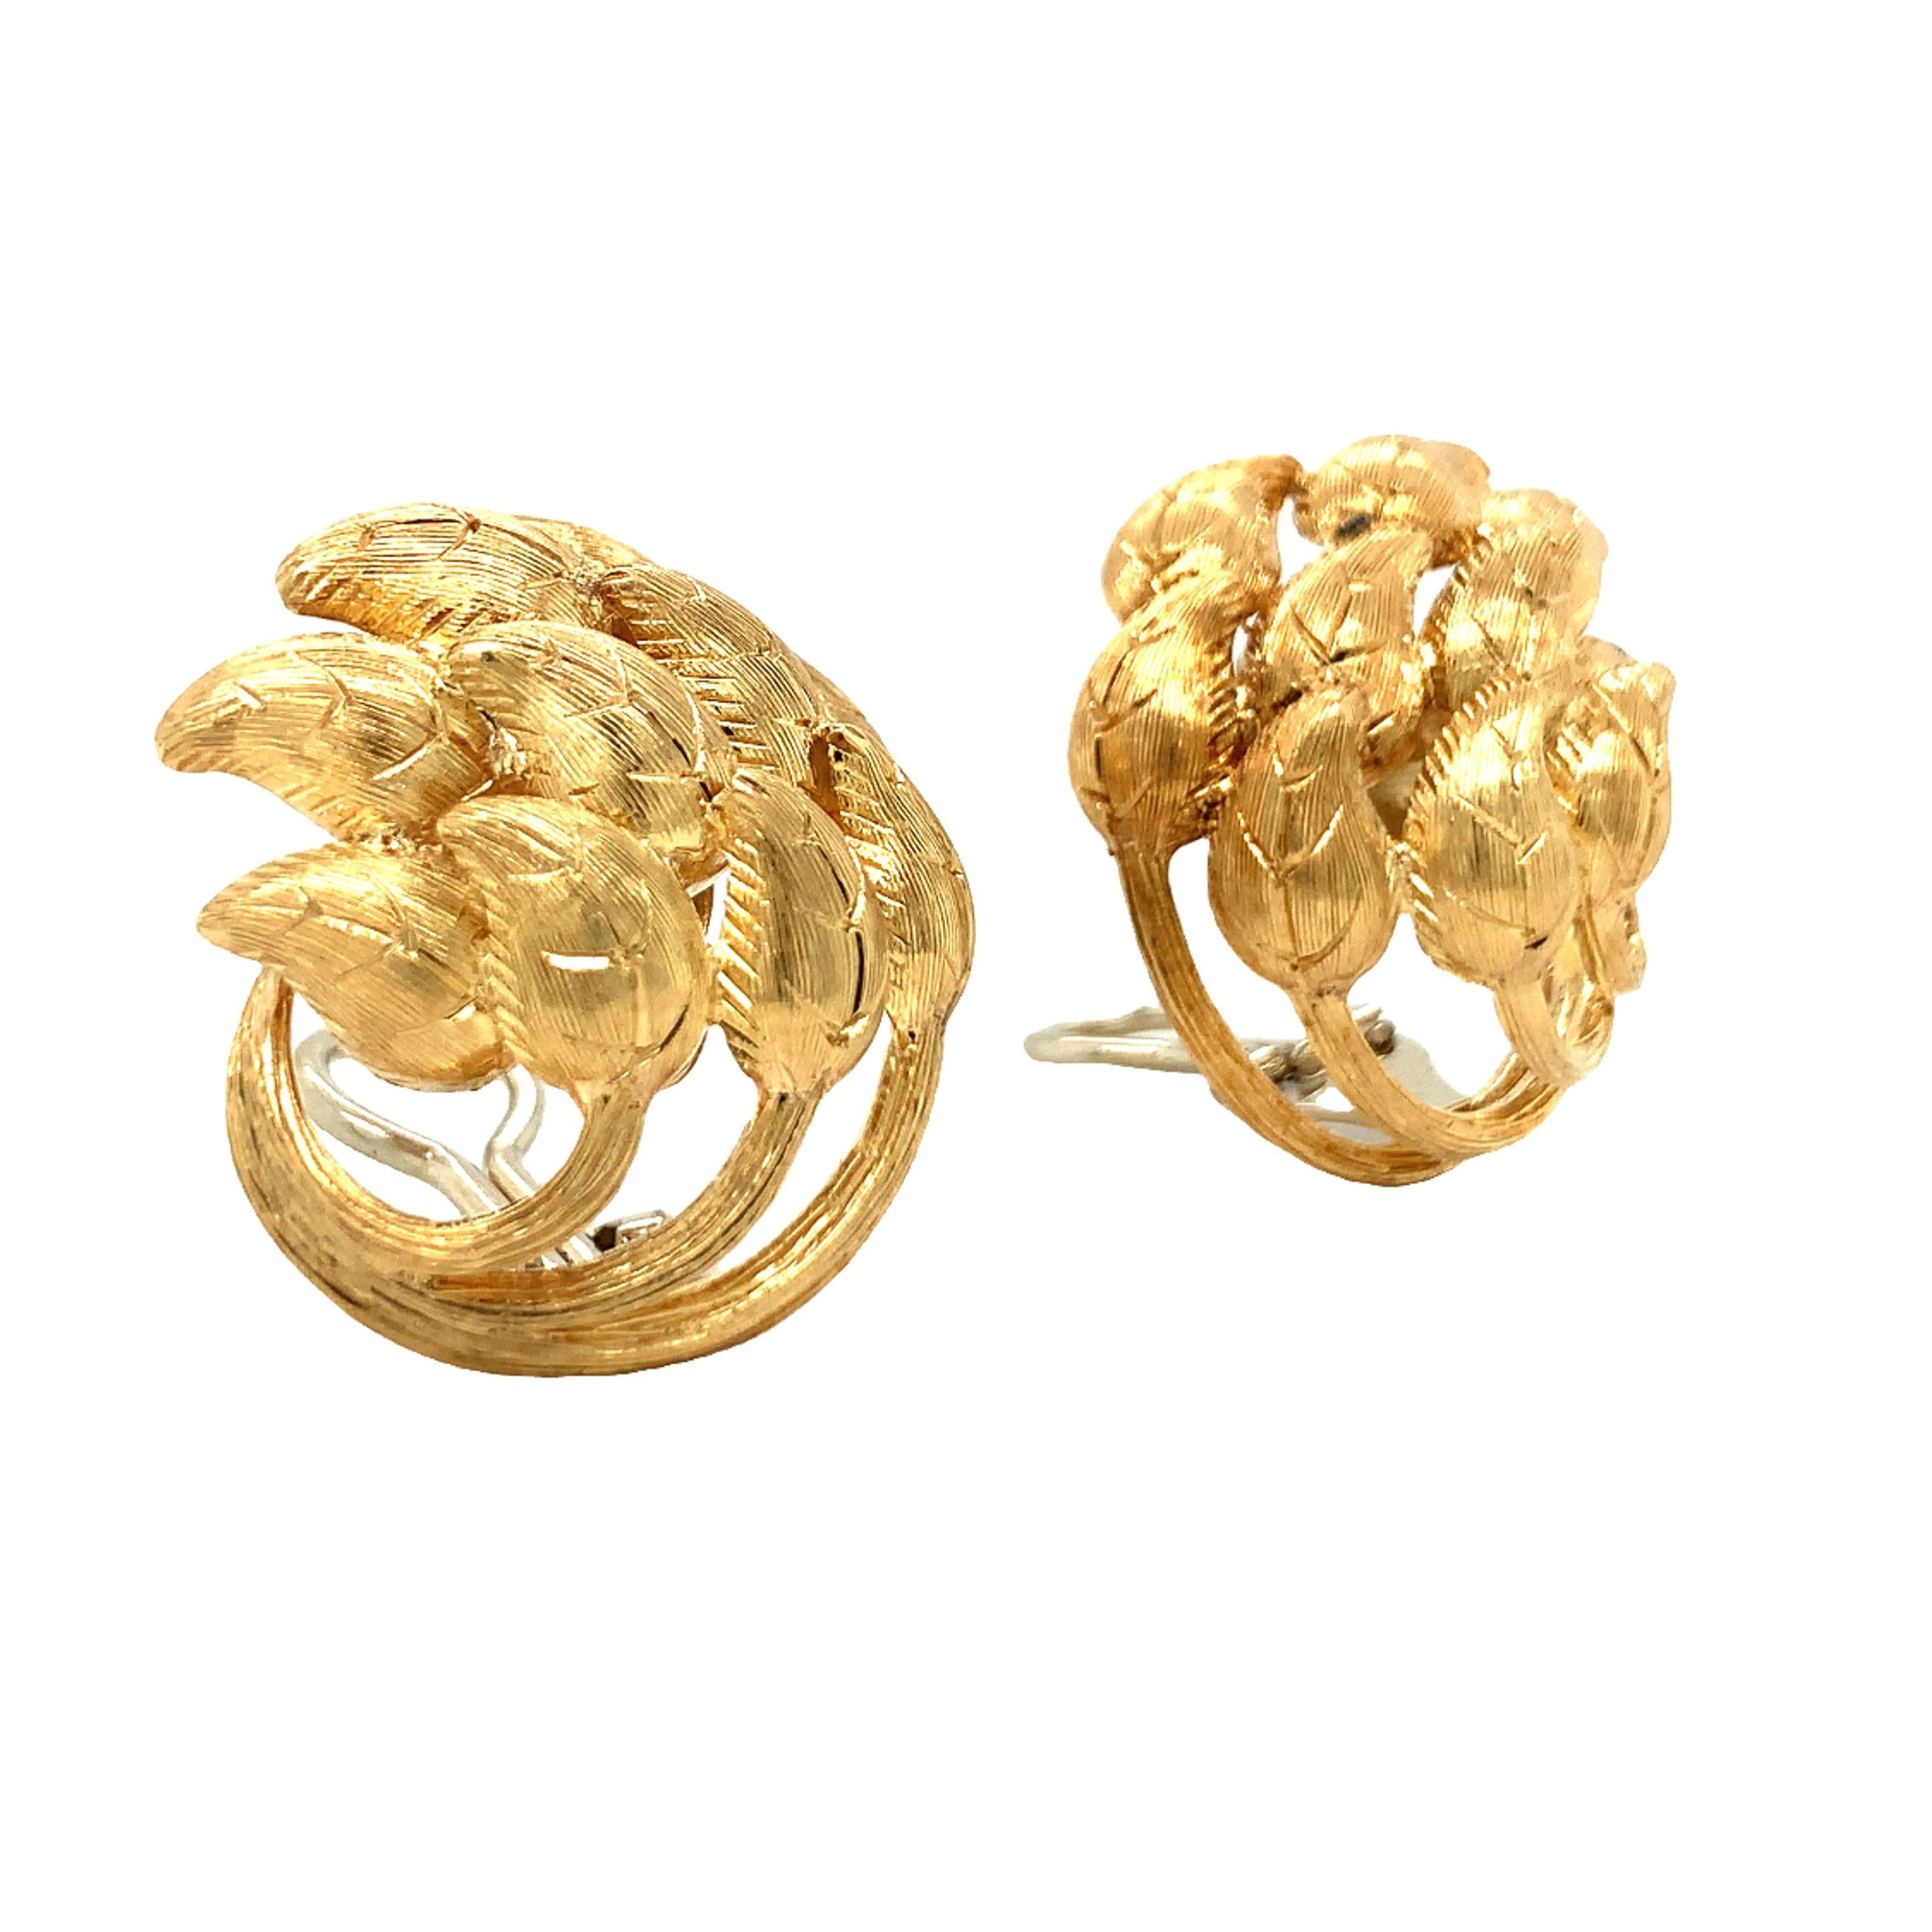 One pair of leaf motif 18K yellow gold earrings with a textured finish and a bundle of leaves design. With posts and backs, Italian hallmarks. Circa 1960s.

Elaborate, sleek, divine.

Metal: 18K yellow gold
Circa: 1960s
Stamp/Hallmark: 750, Italian